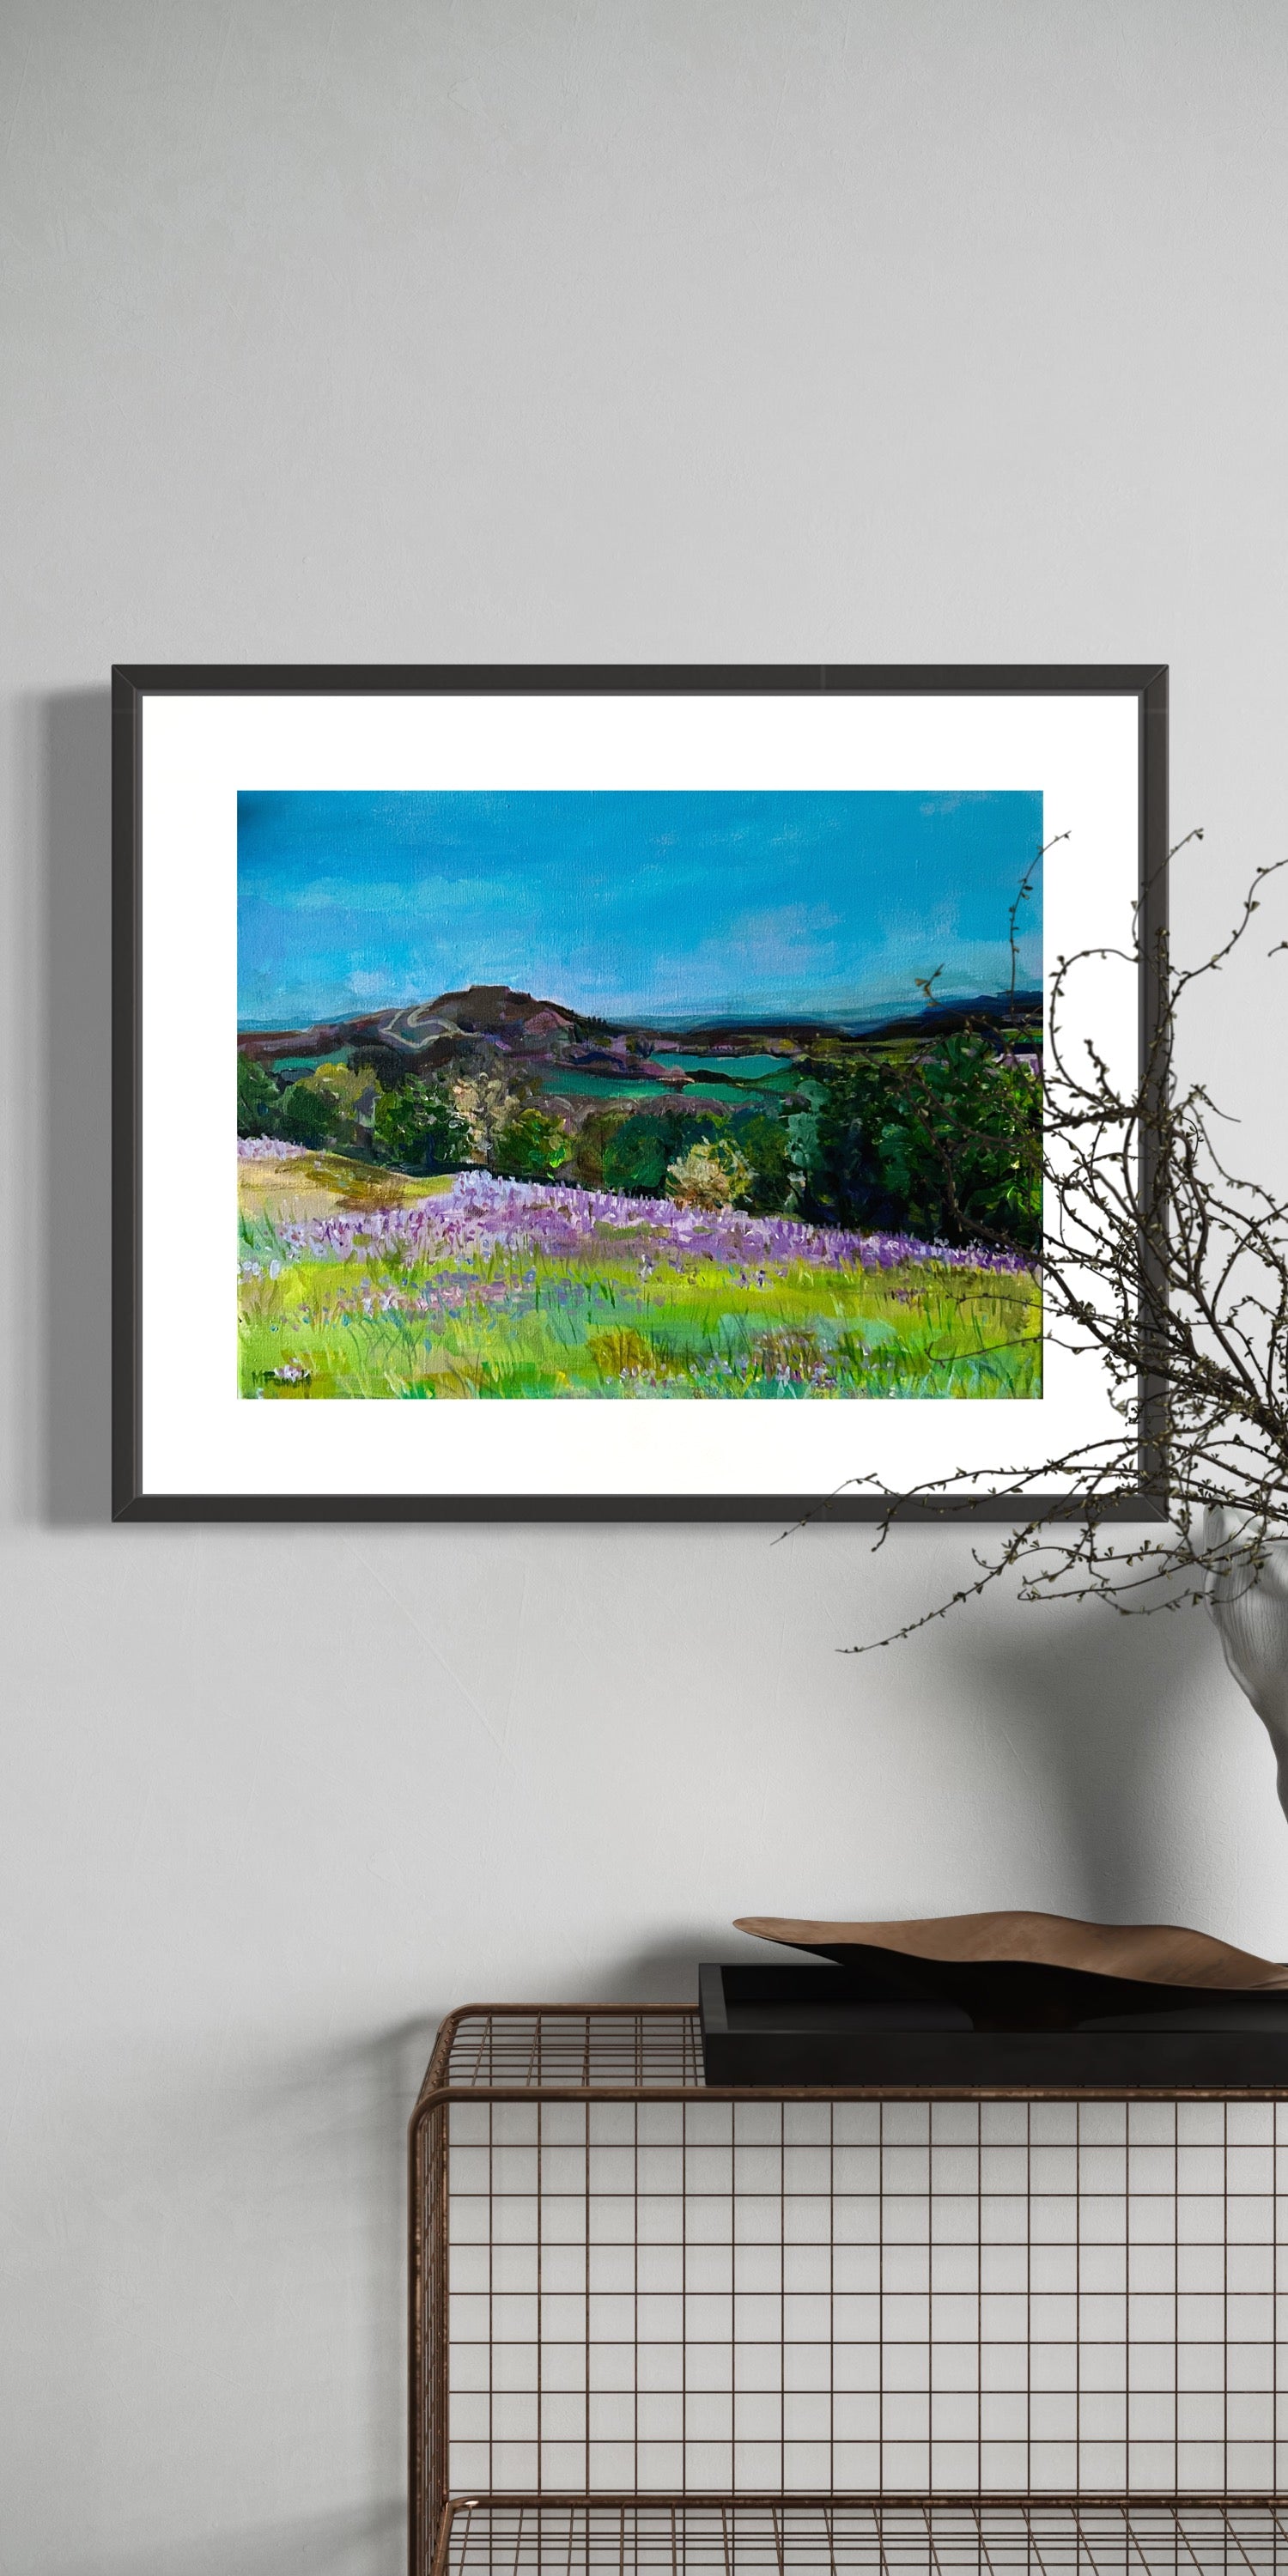 Framed print of Bluebells in the Malvern Hills from original painting by Margaret Powell. Displayed on a white wall.